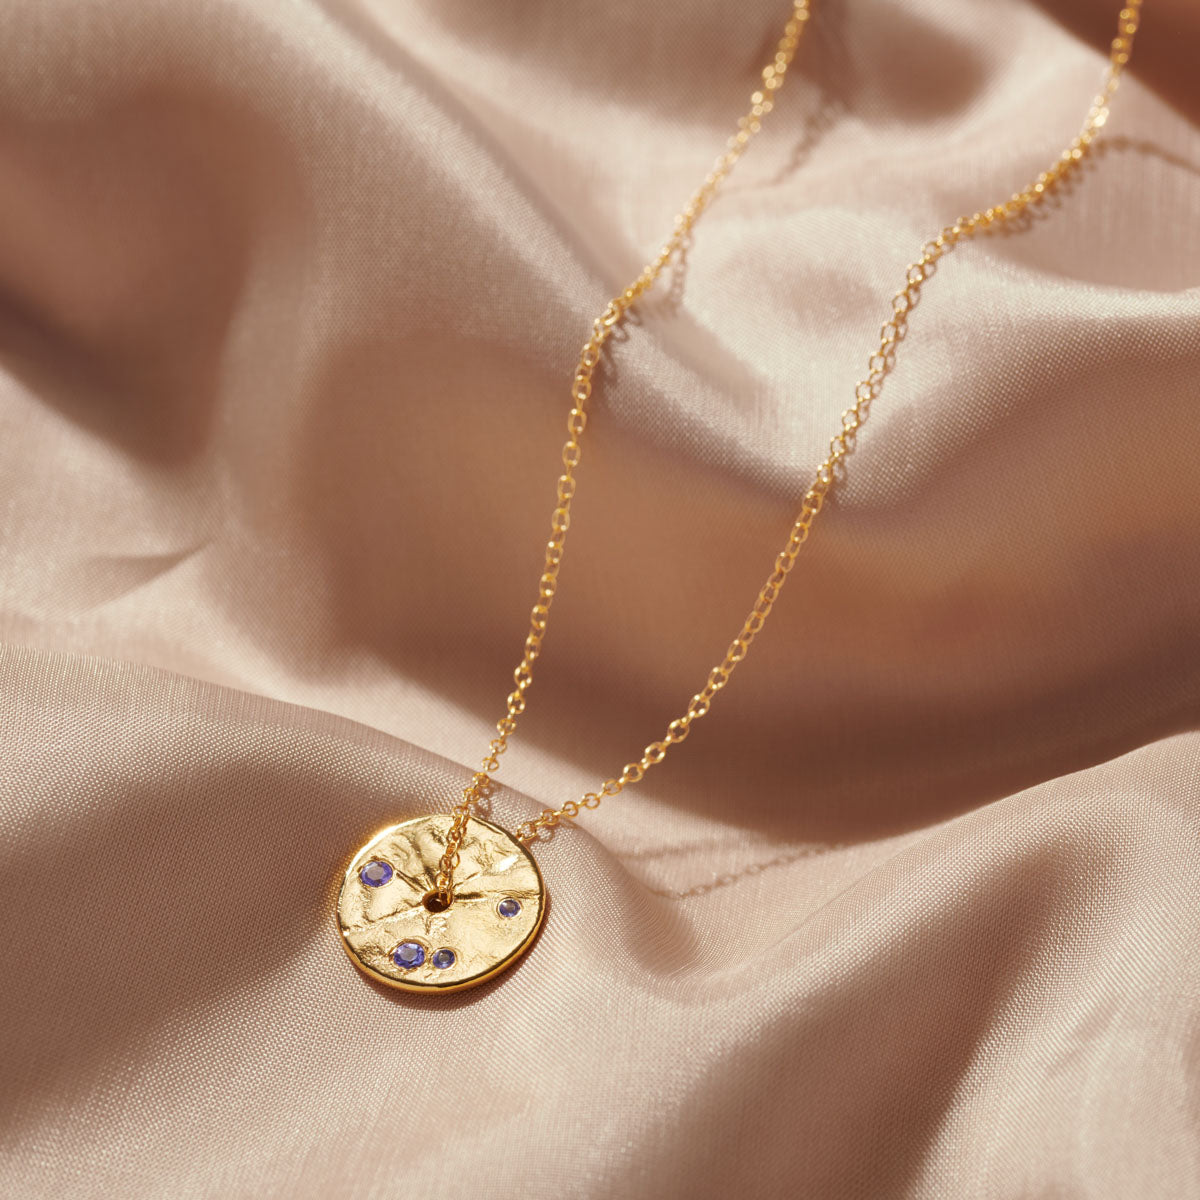 Tanzanite gemstones set into gold spinning disc pendant on fine gold chain. Ideal gift for a December birthday.